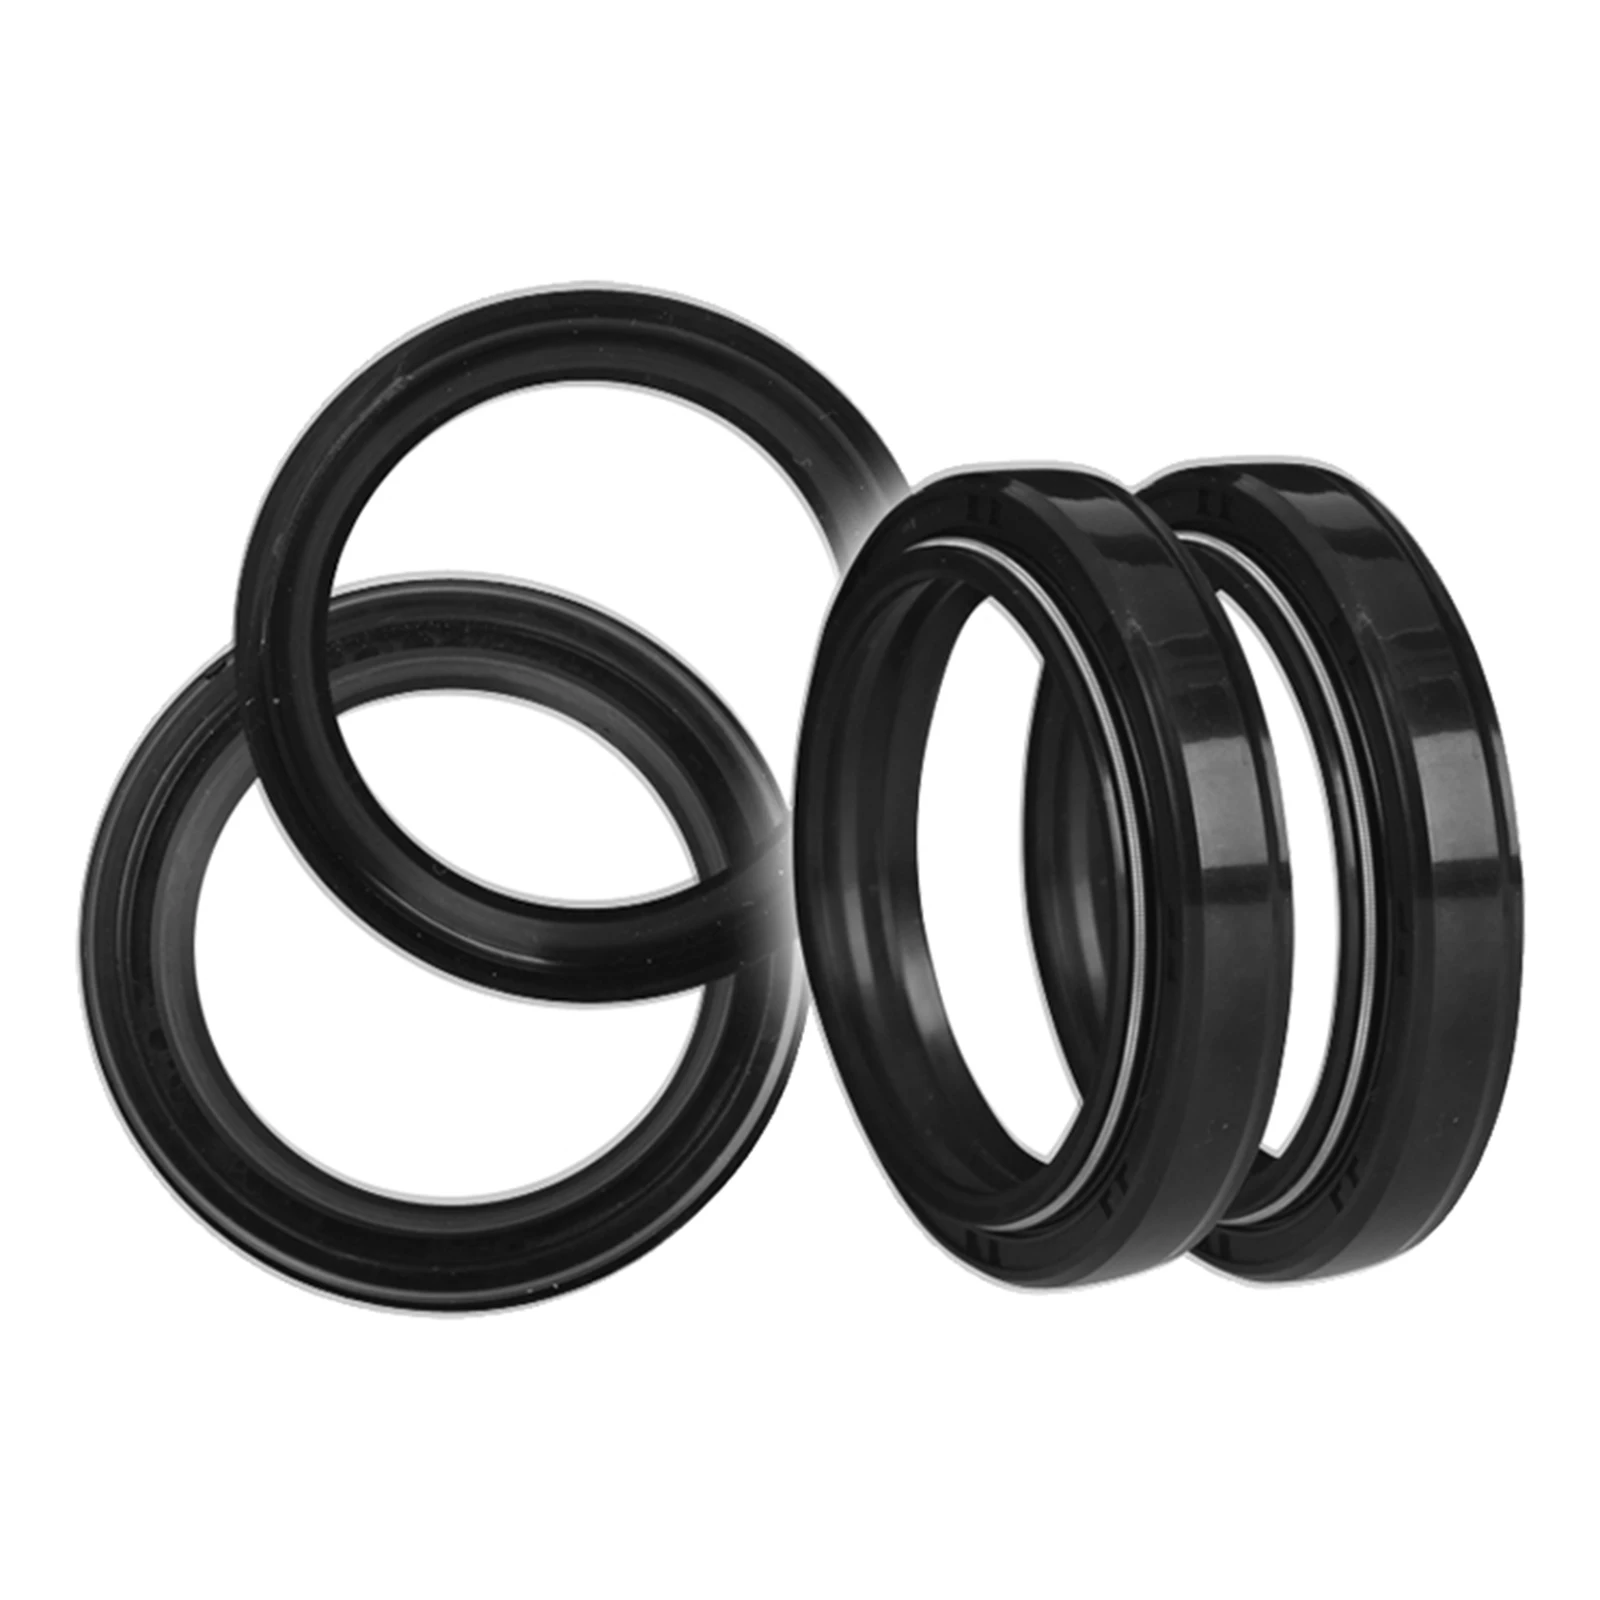 Motorcycles Fork Damper Shock Absorber Oil Seal and Dust Seal Set 39x52x11mm for 3XV R1 Kawasaki  250 52X39-11